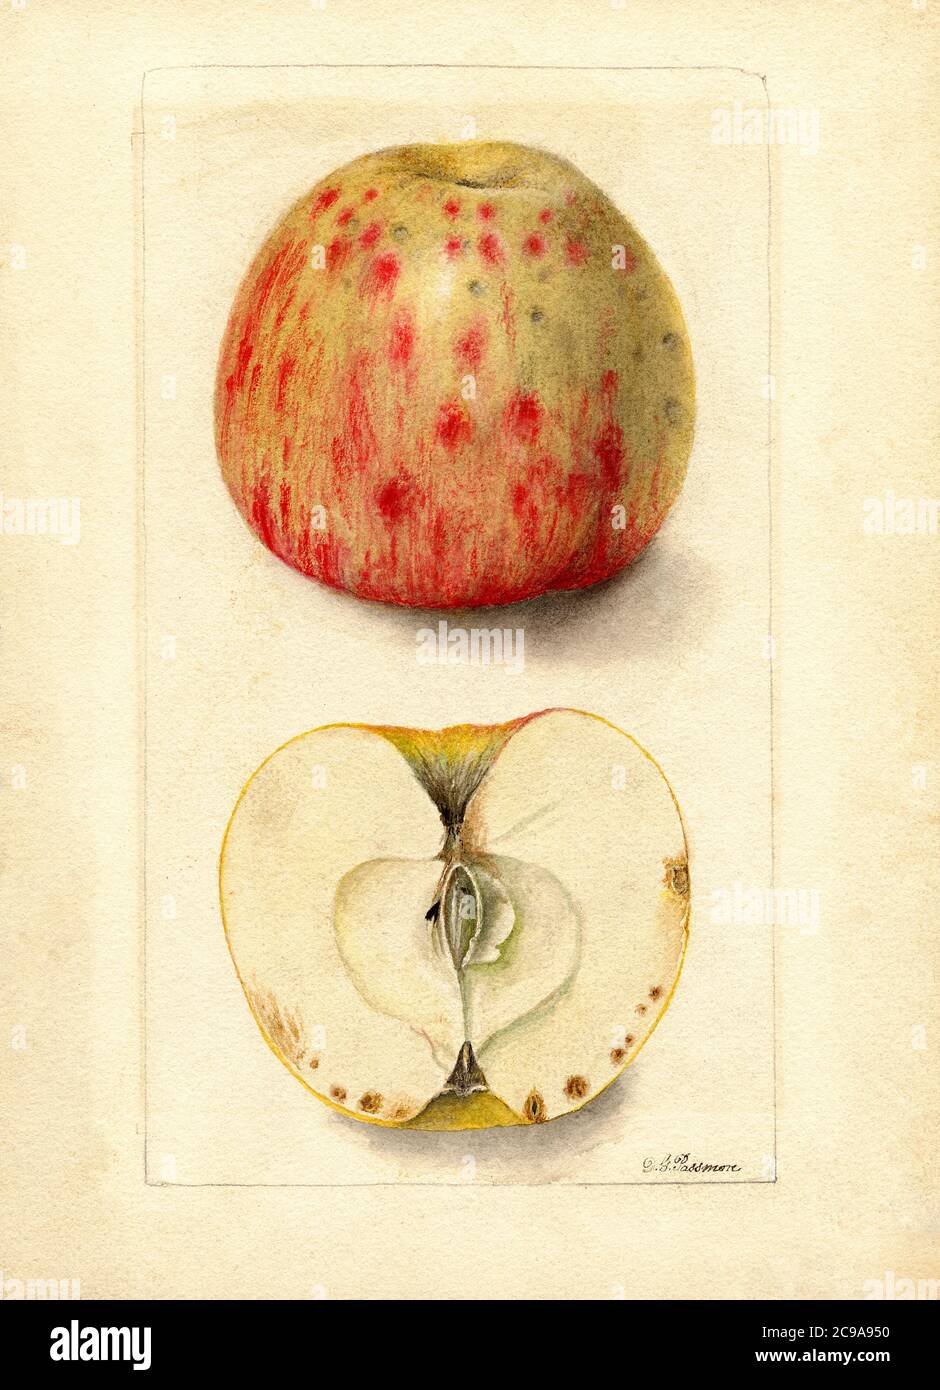 Bitter Pit Apples, Malus domestica, Watercolor Illustration by Deborah Griscom Passmore, U.S. Department of Agriculture Pomological Watercolor Collection, Stock Photo